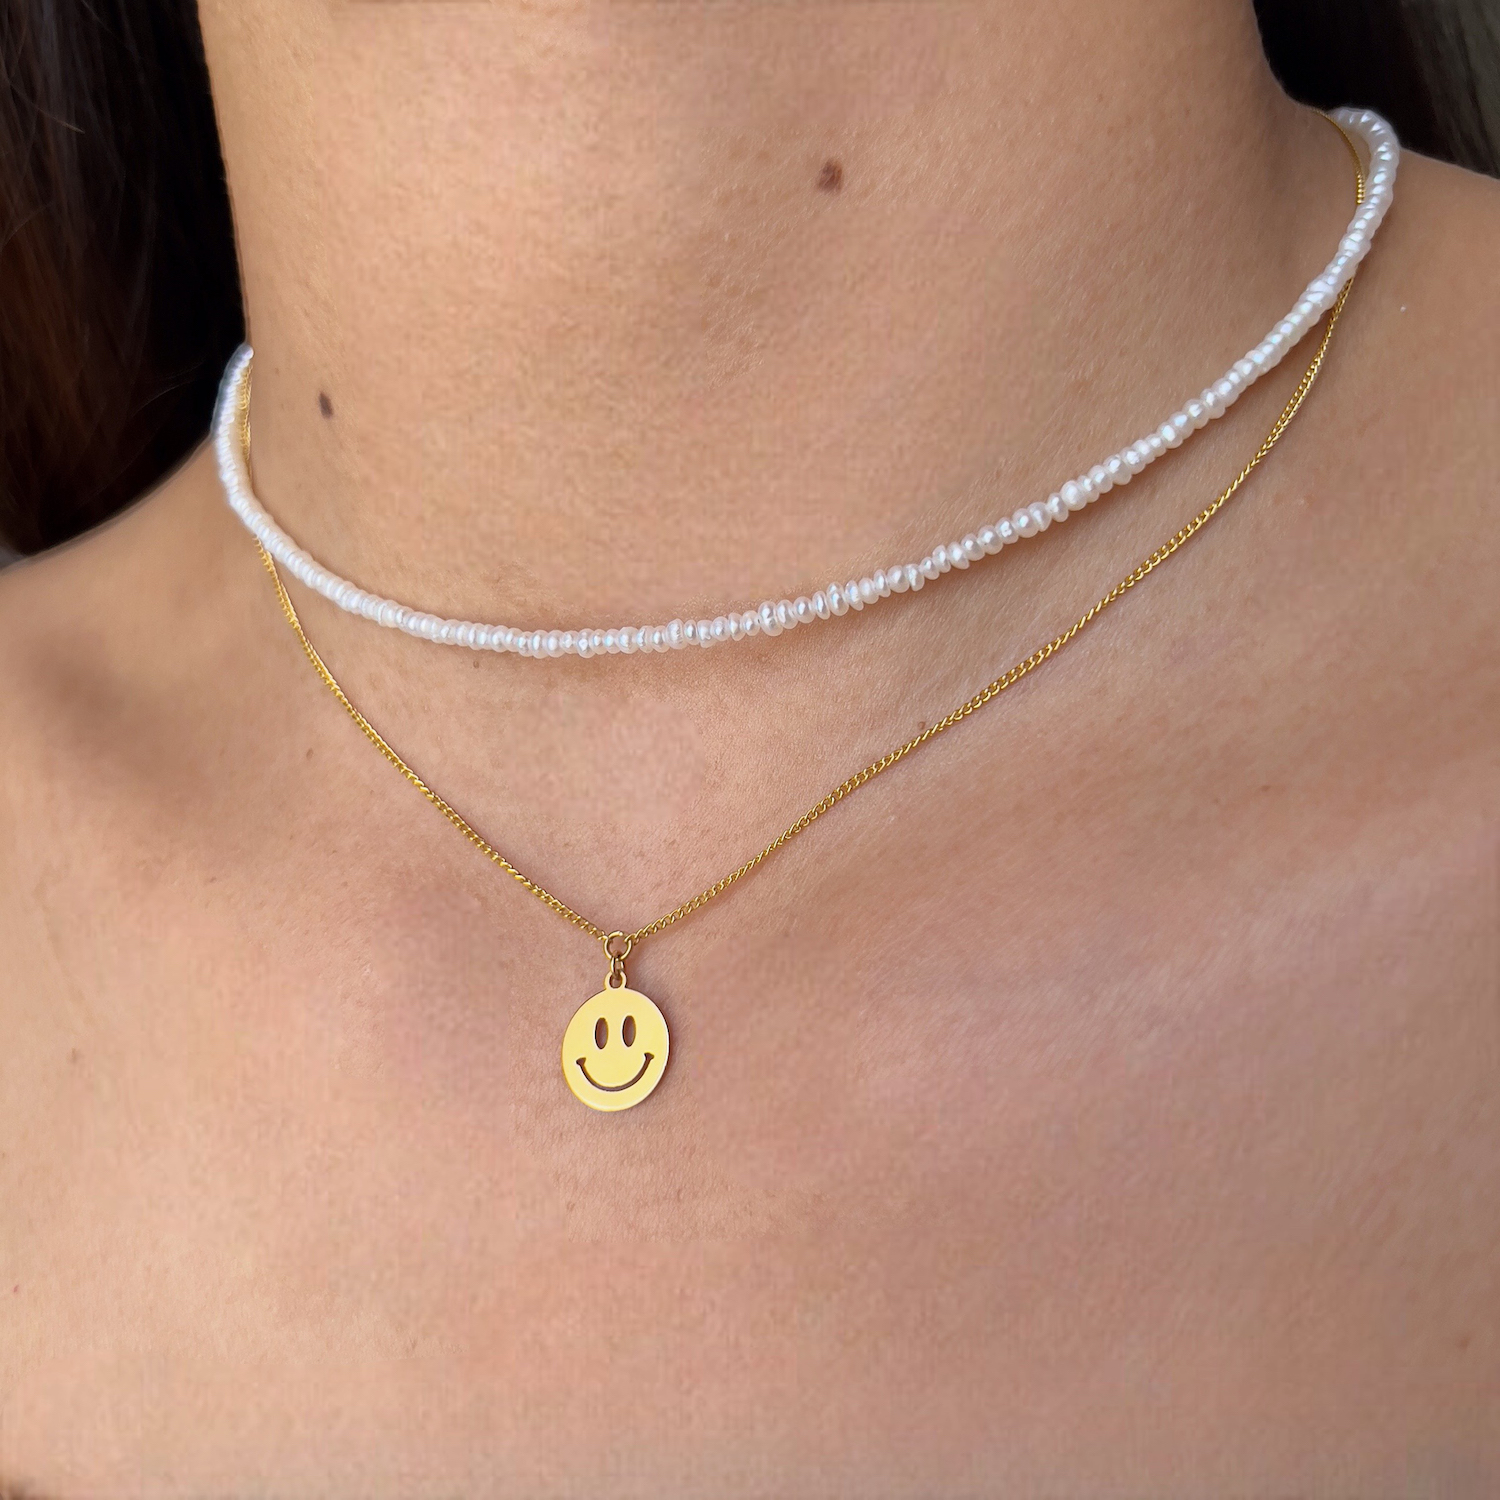 Smiley Face Pendant Necklace | Urban Outfitters Singapore